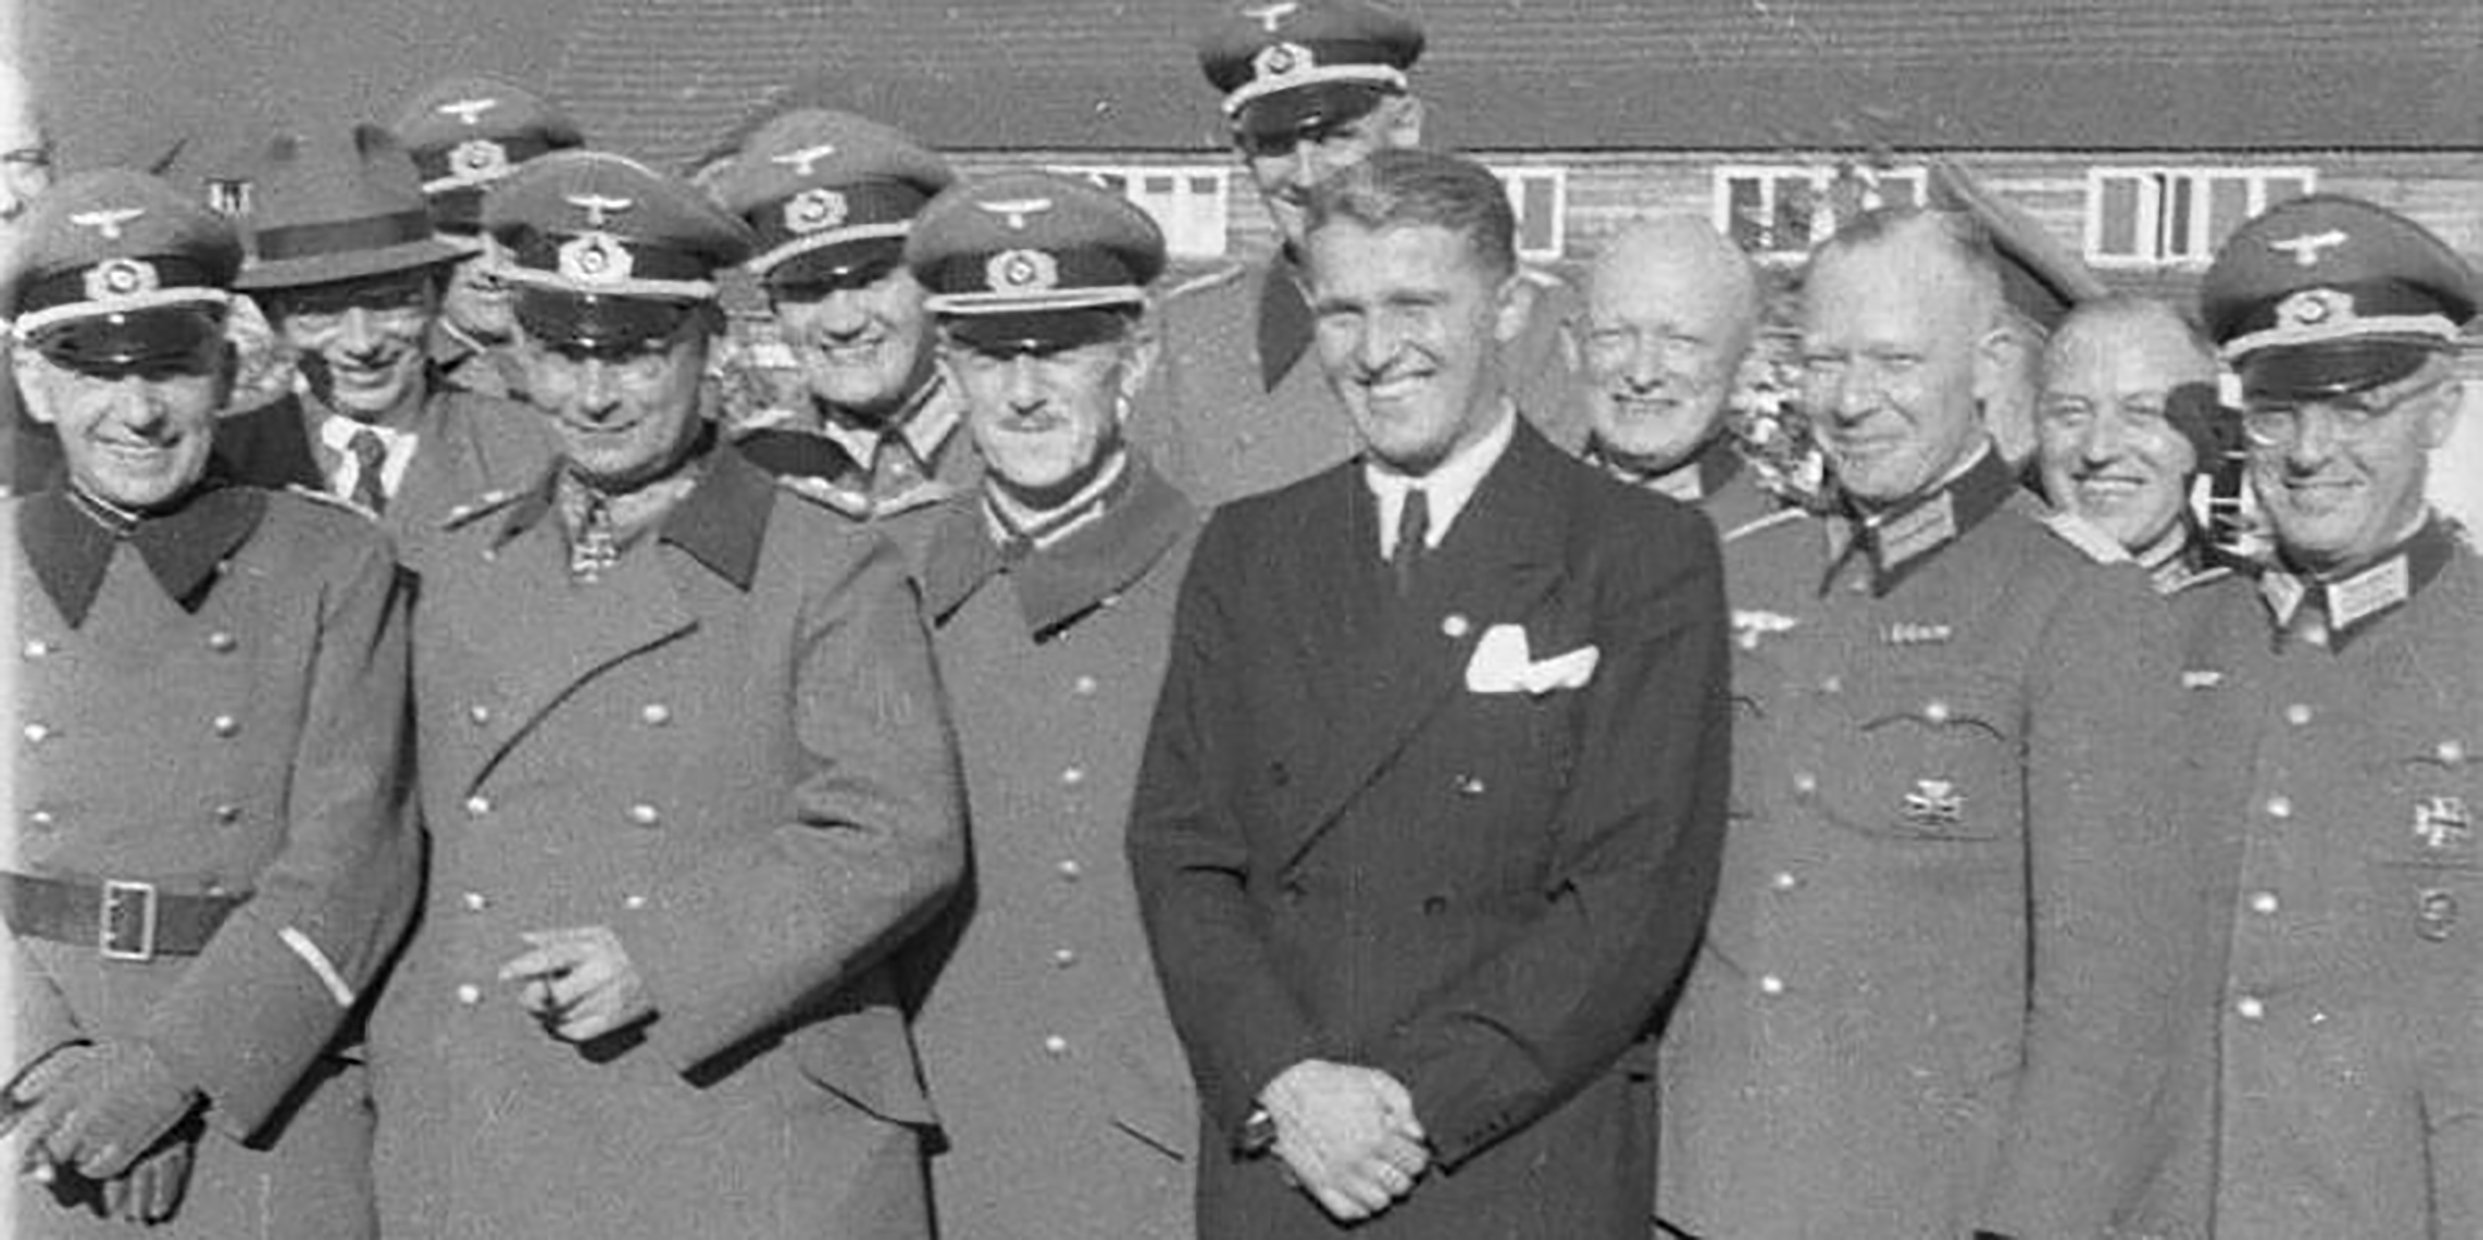 Group historical photo of a smiling Wernher von Braun together with other uniformed Nazis.